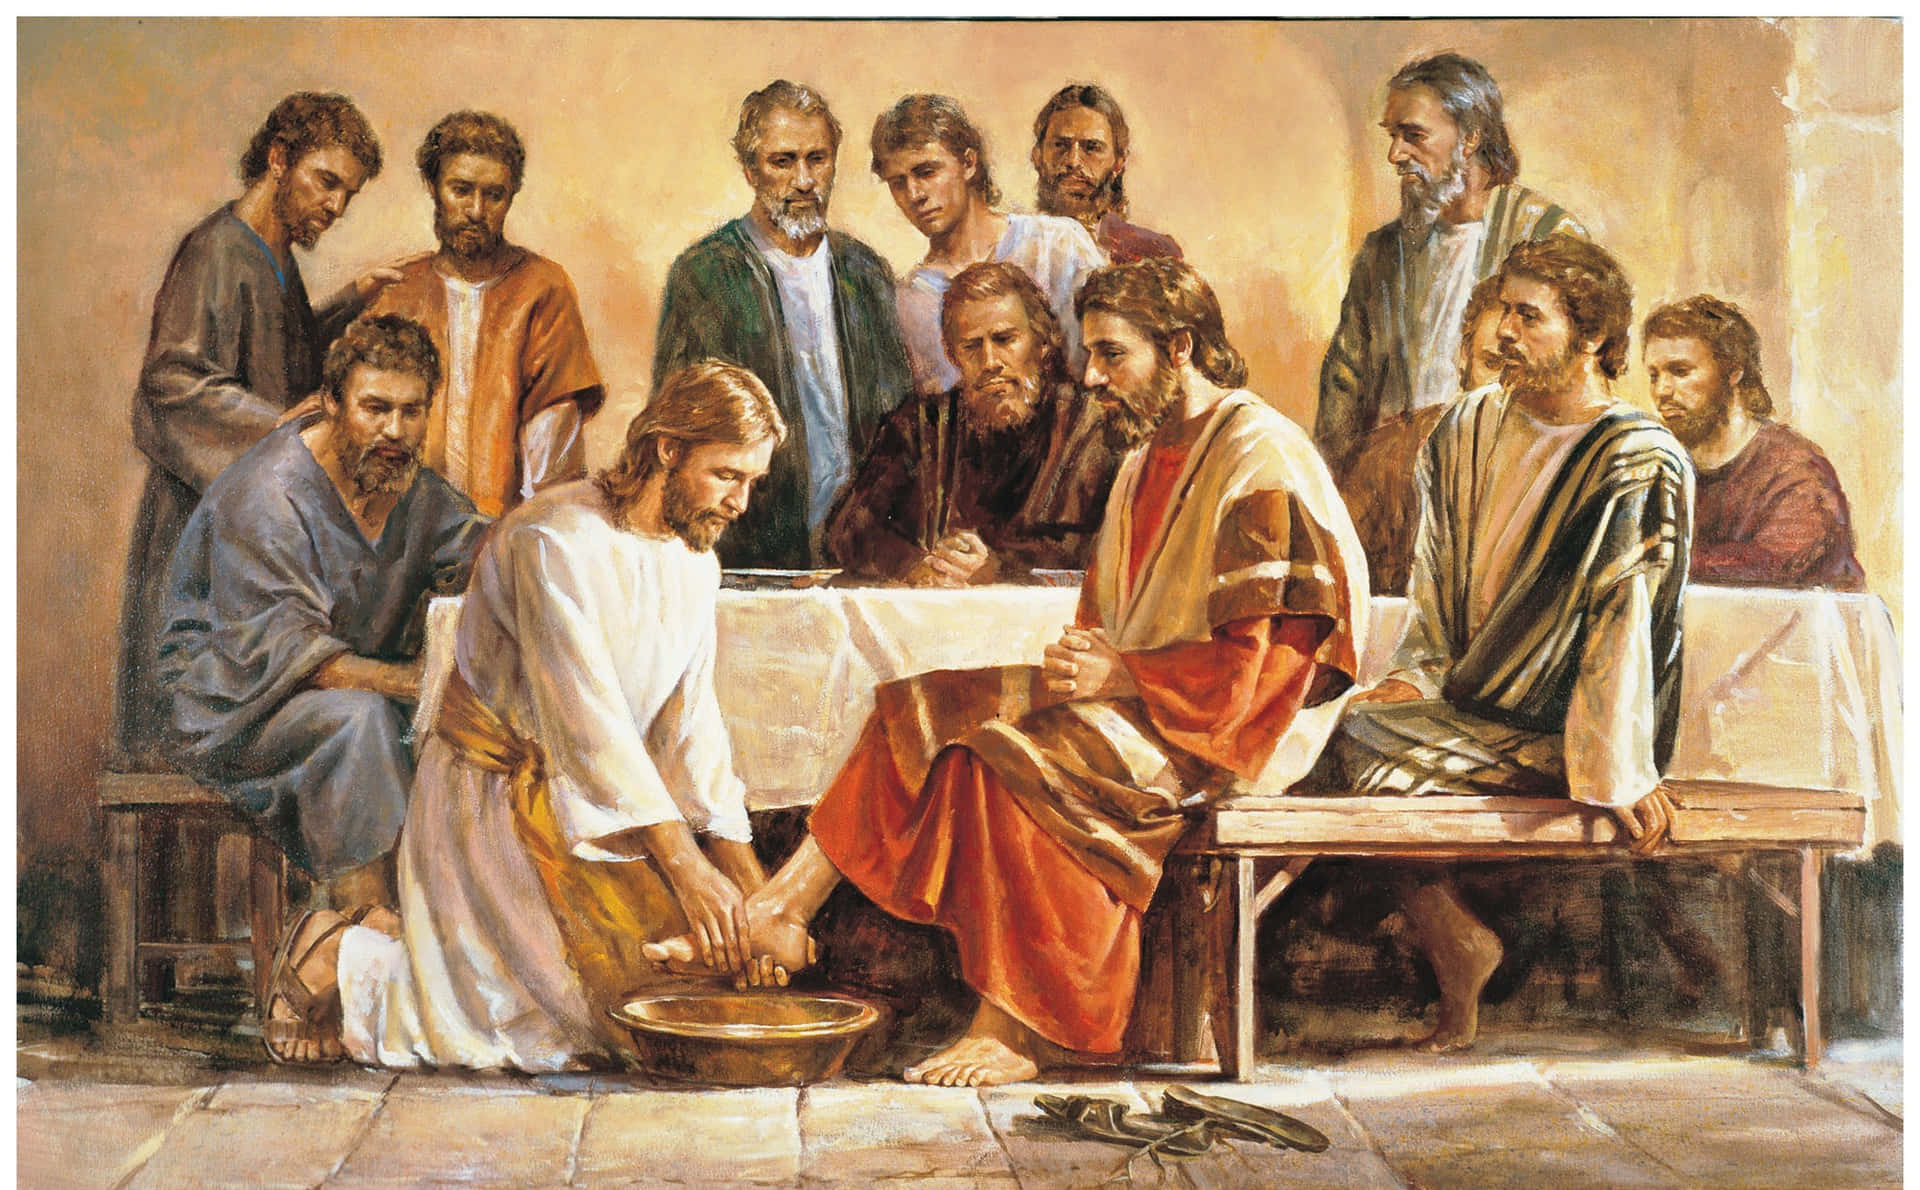 Jesus and His Disciples in a Serene Moment Wallpaper